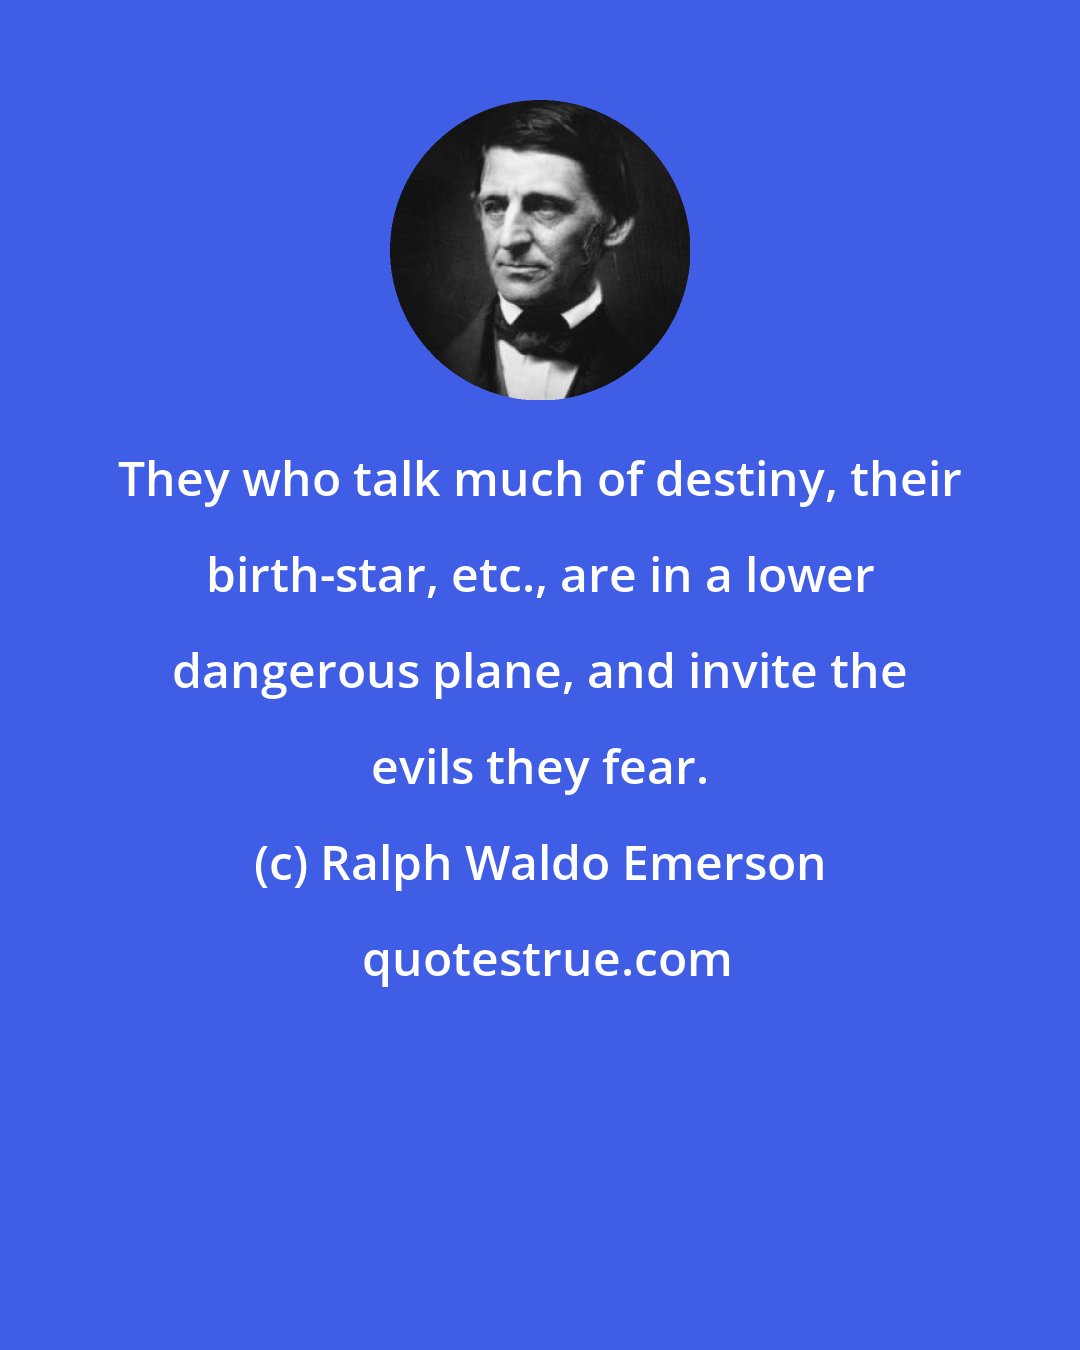 Ralph Waldo Emerson: They who talk much of destiny, their birth-star, etc., are in a lower dangerous plane, and invite the evils they fear.